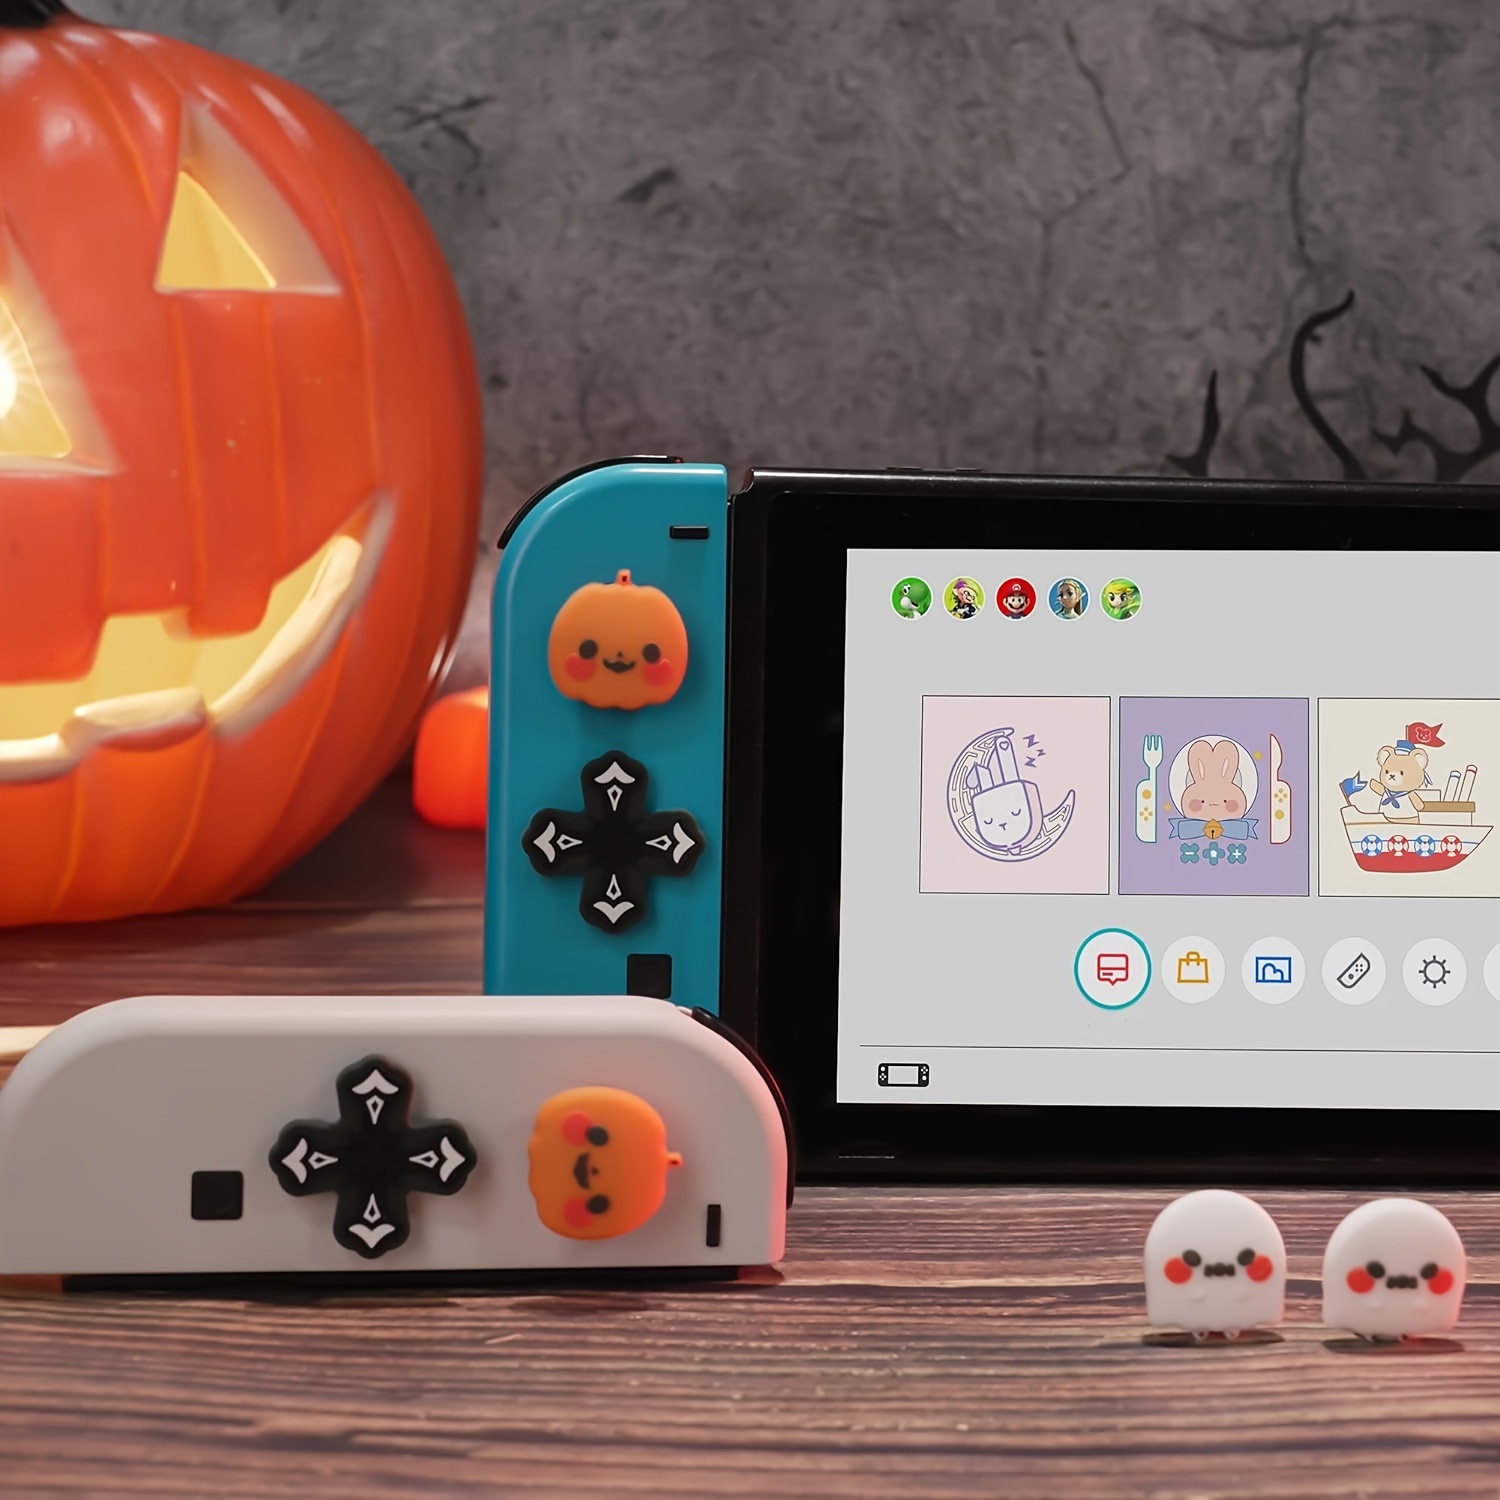 

spooky Fun" Halloween-themed Silicone Button Caps Set For Nintendo Switch/oled - Pumpkin & Ghost Designs, Soft Joystick Covers With Abxy Stickers